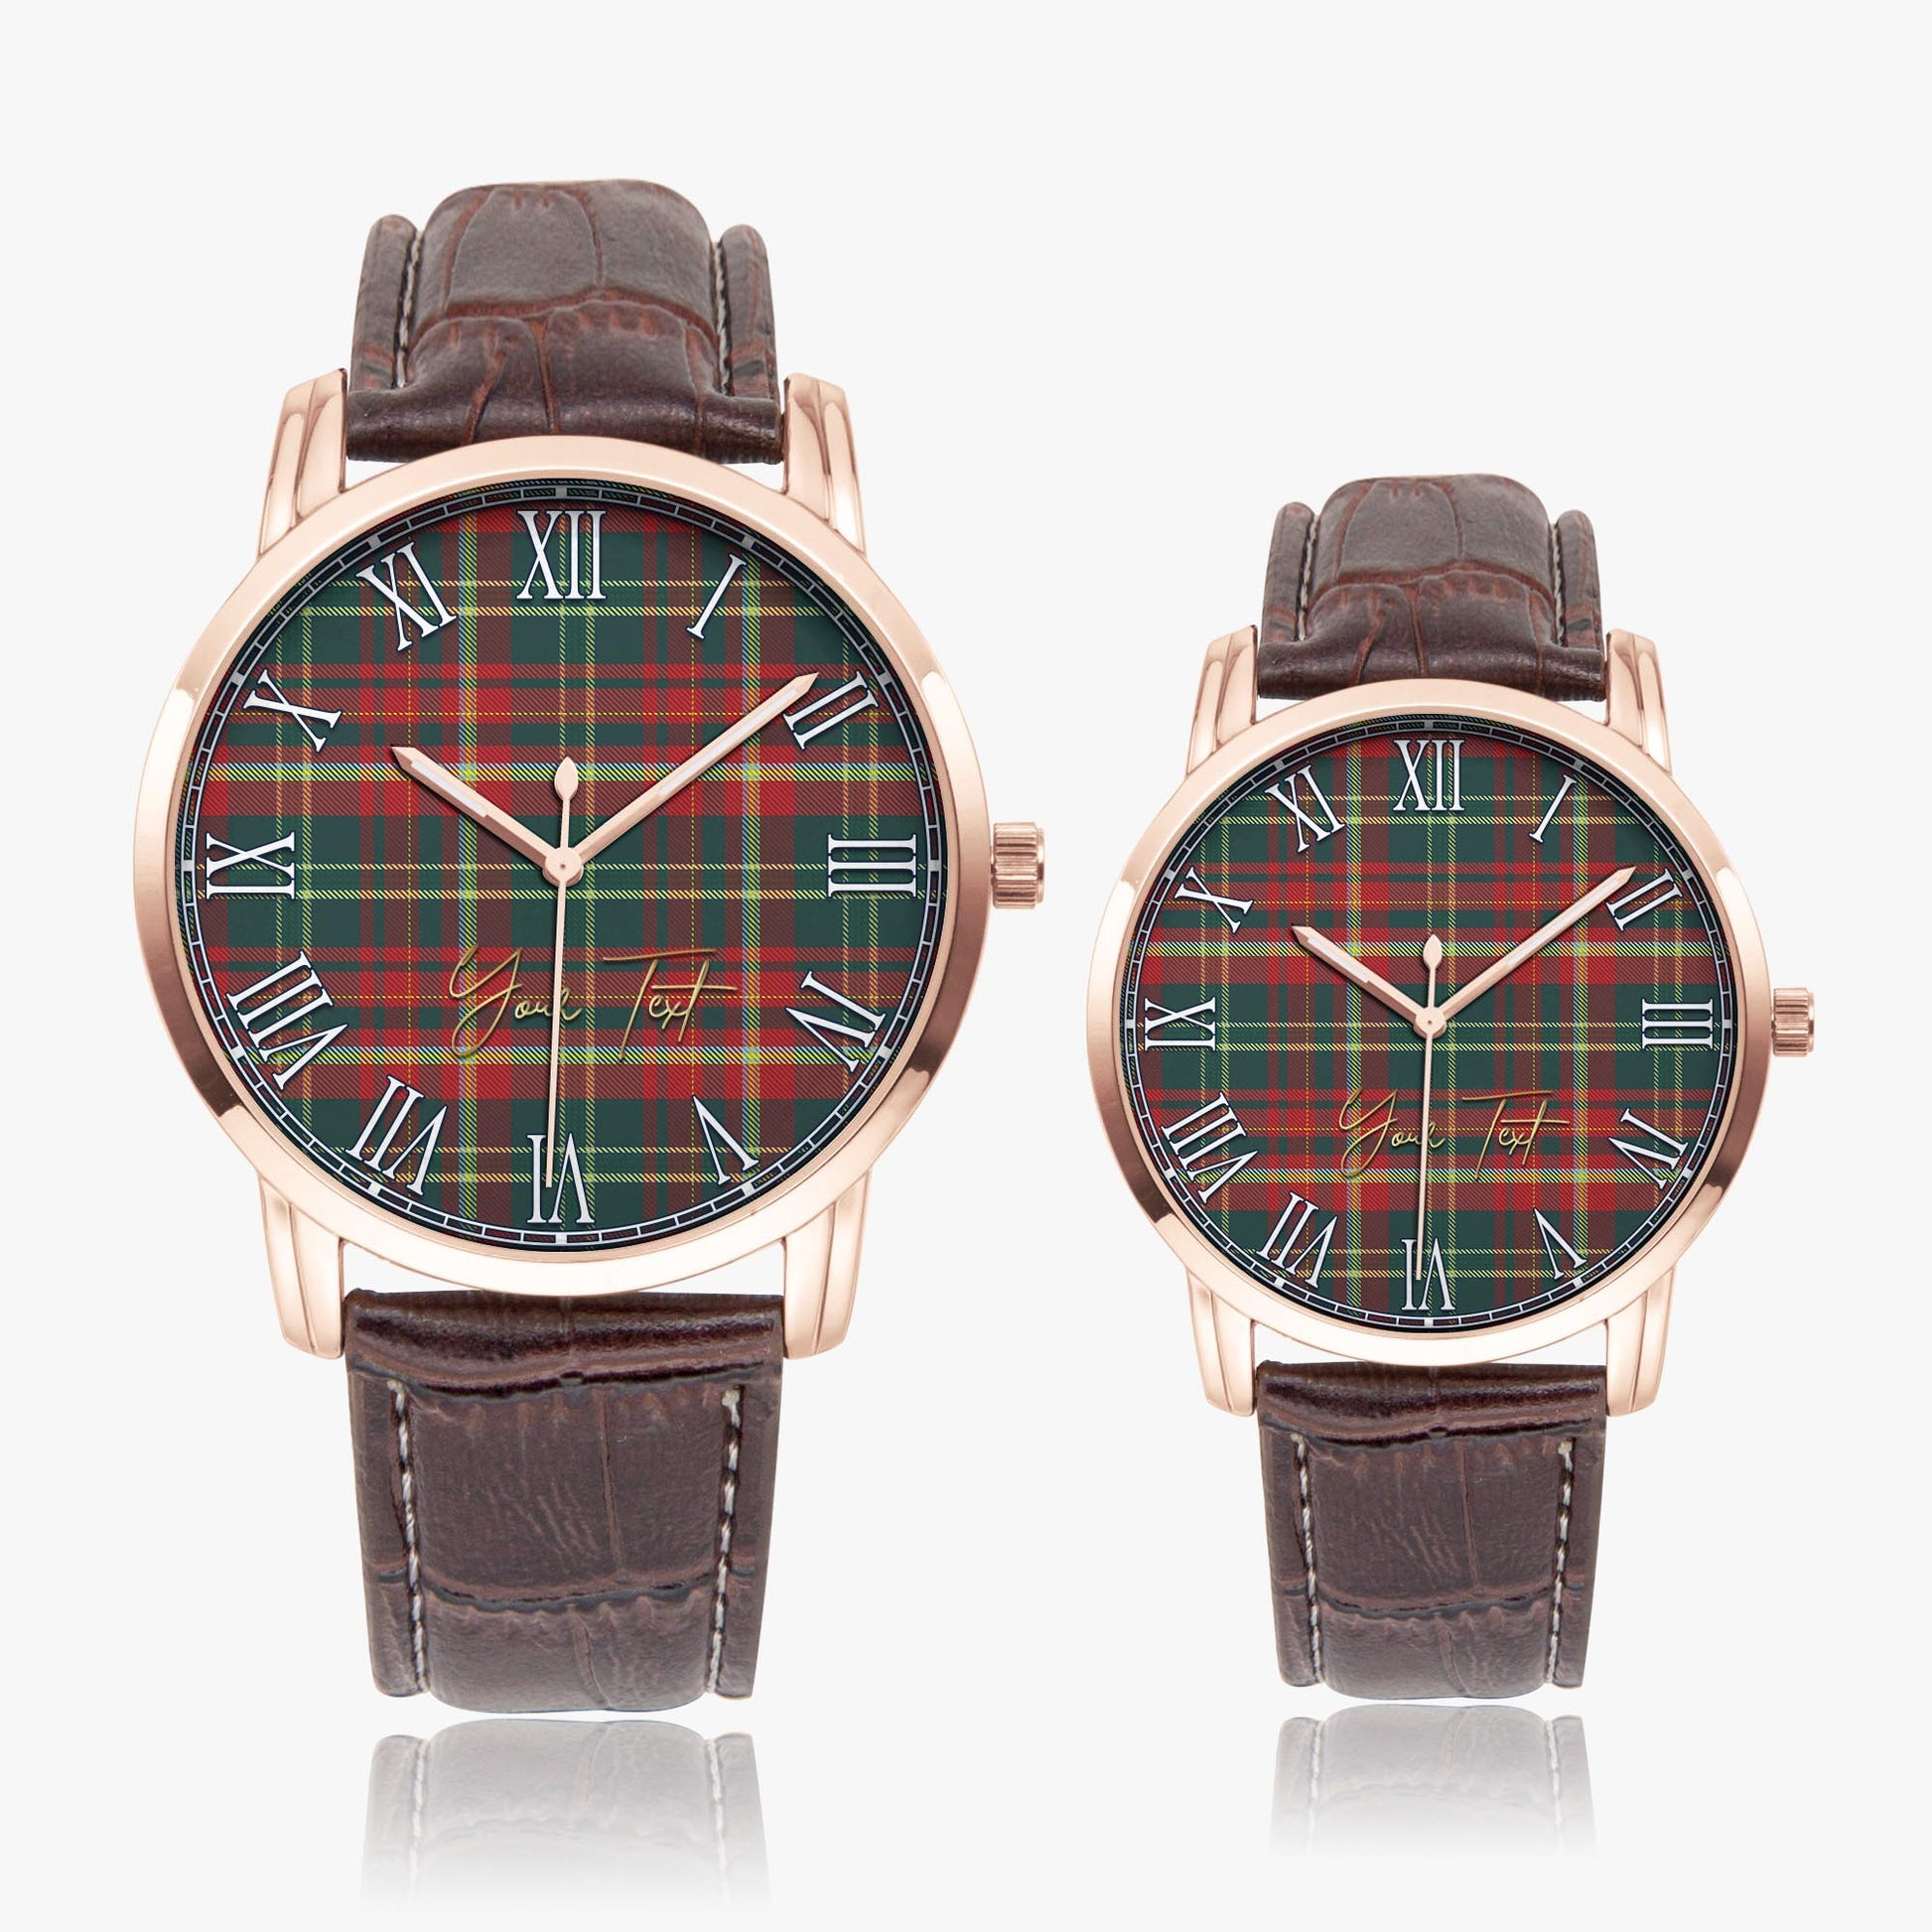 New Brunswick Province Canada Tartan Personalized Your Text Leather Trap Quartz Watch Wide Type Rose Gold Case With Brown Leather Strap - Tartanvibesclothing